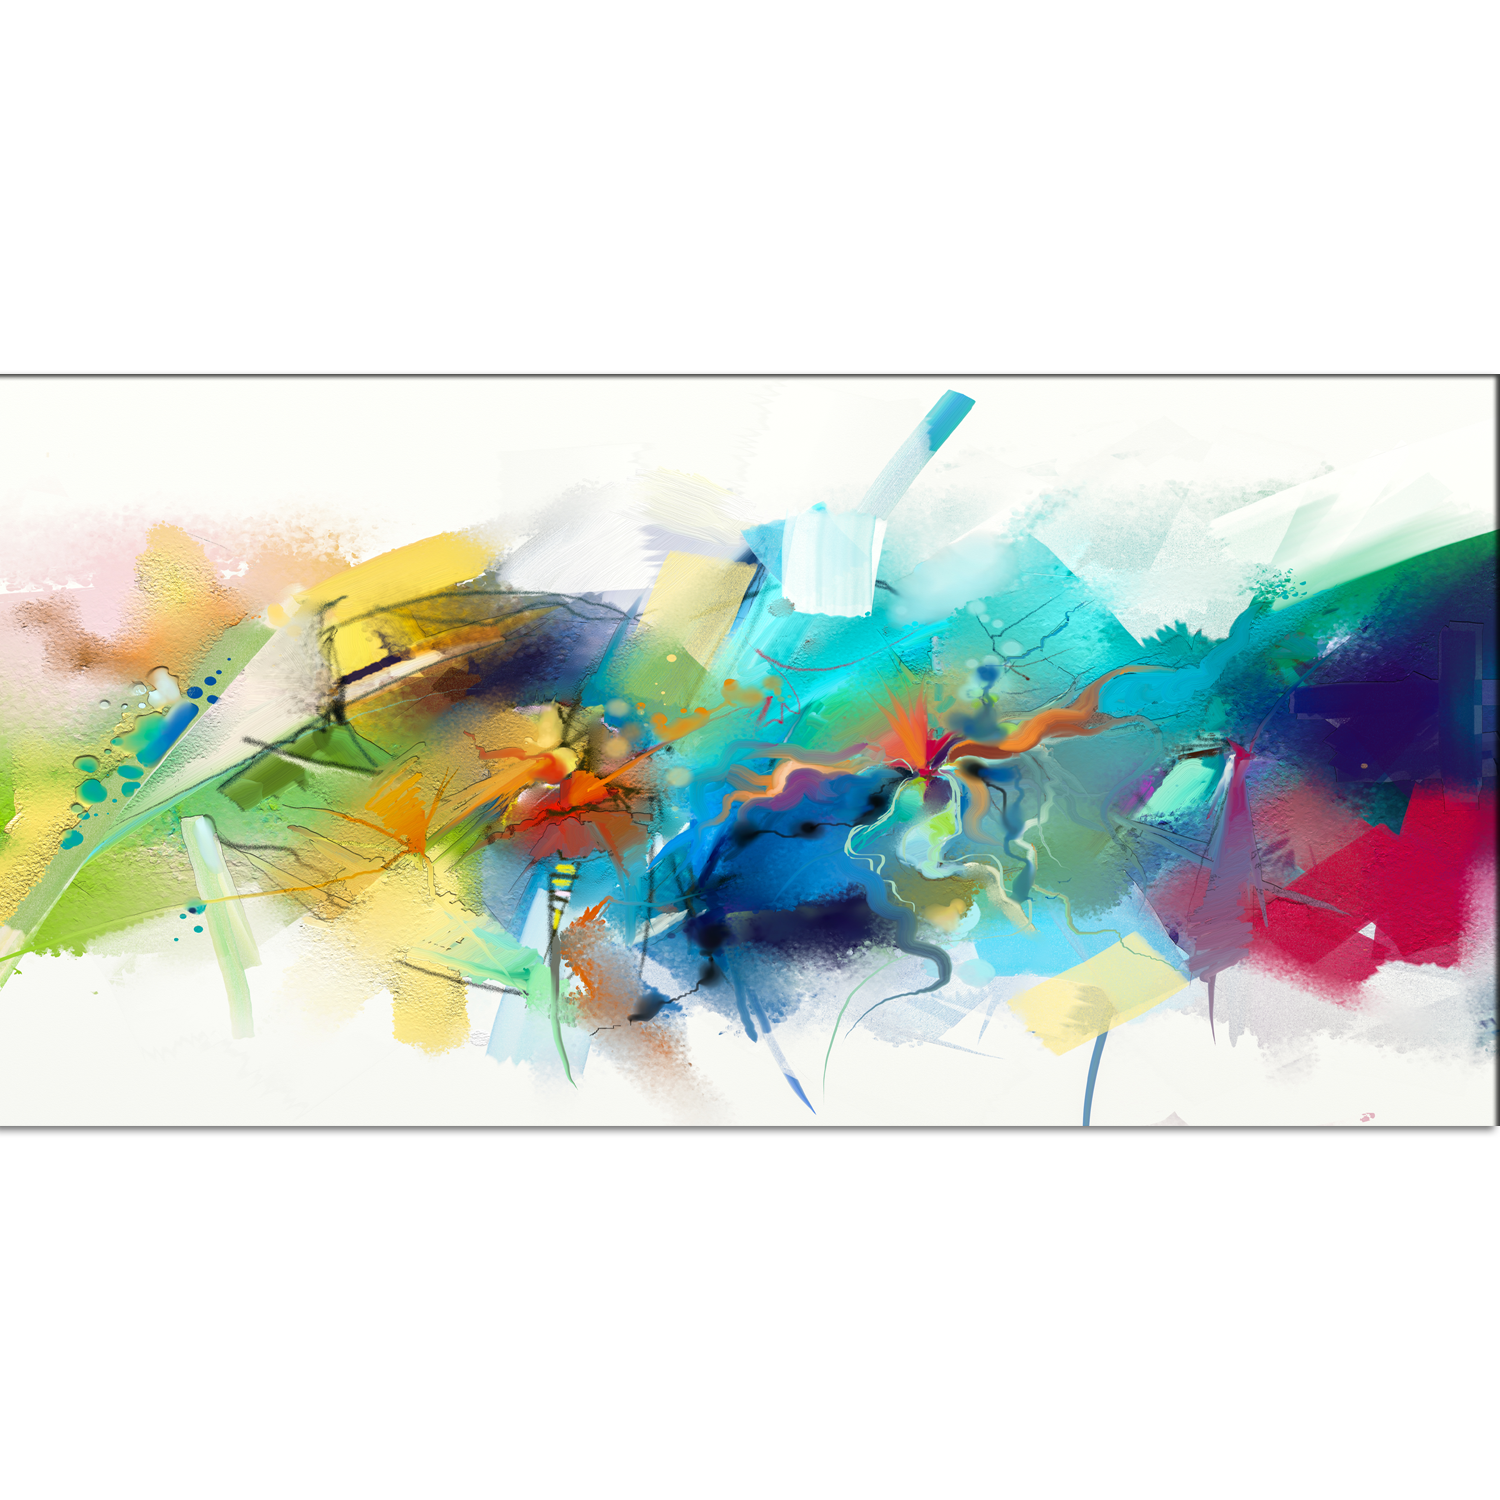 Quadro's Abstract Canvas Print Wall Painting